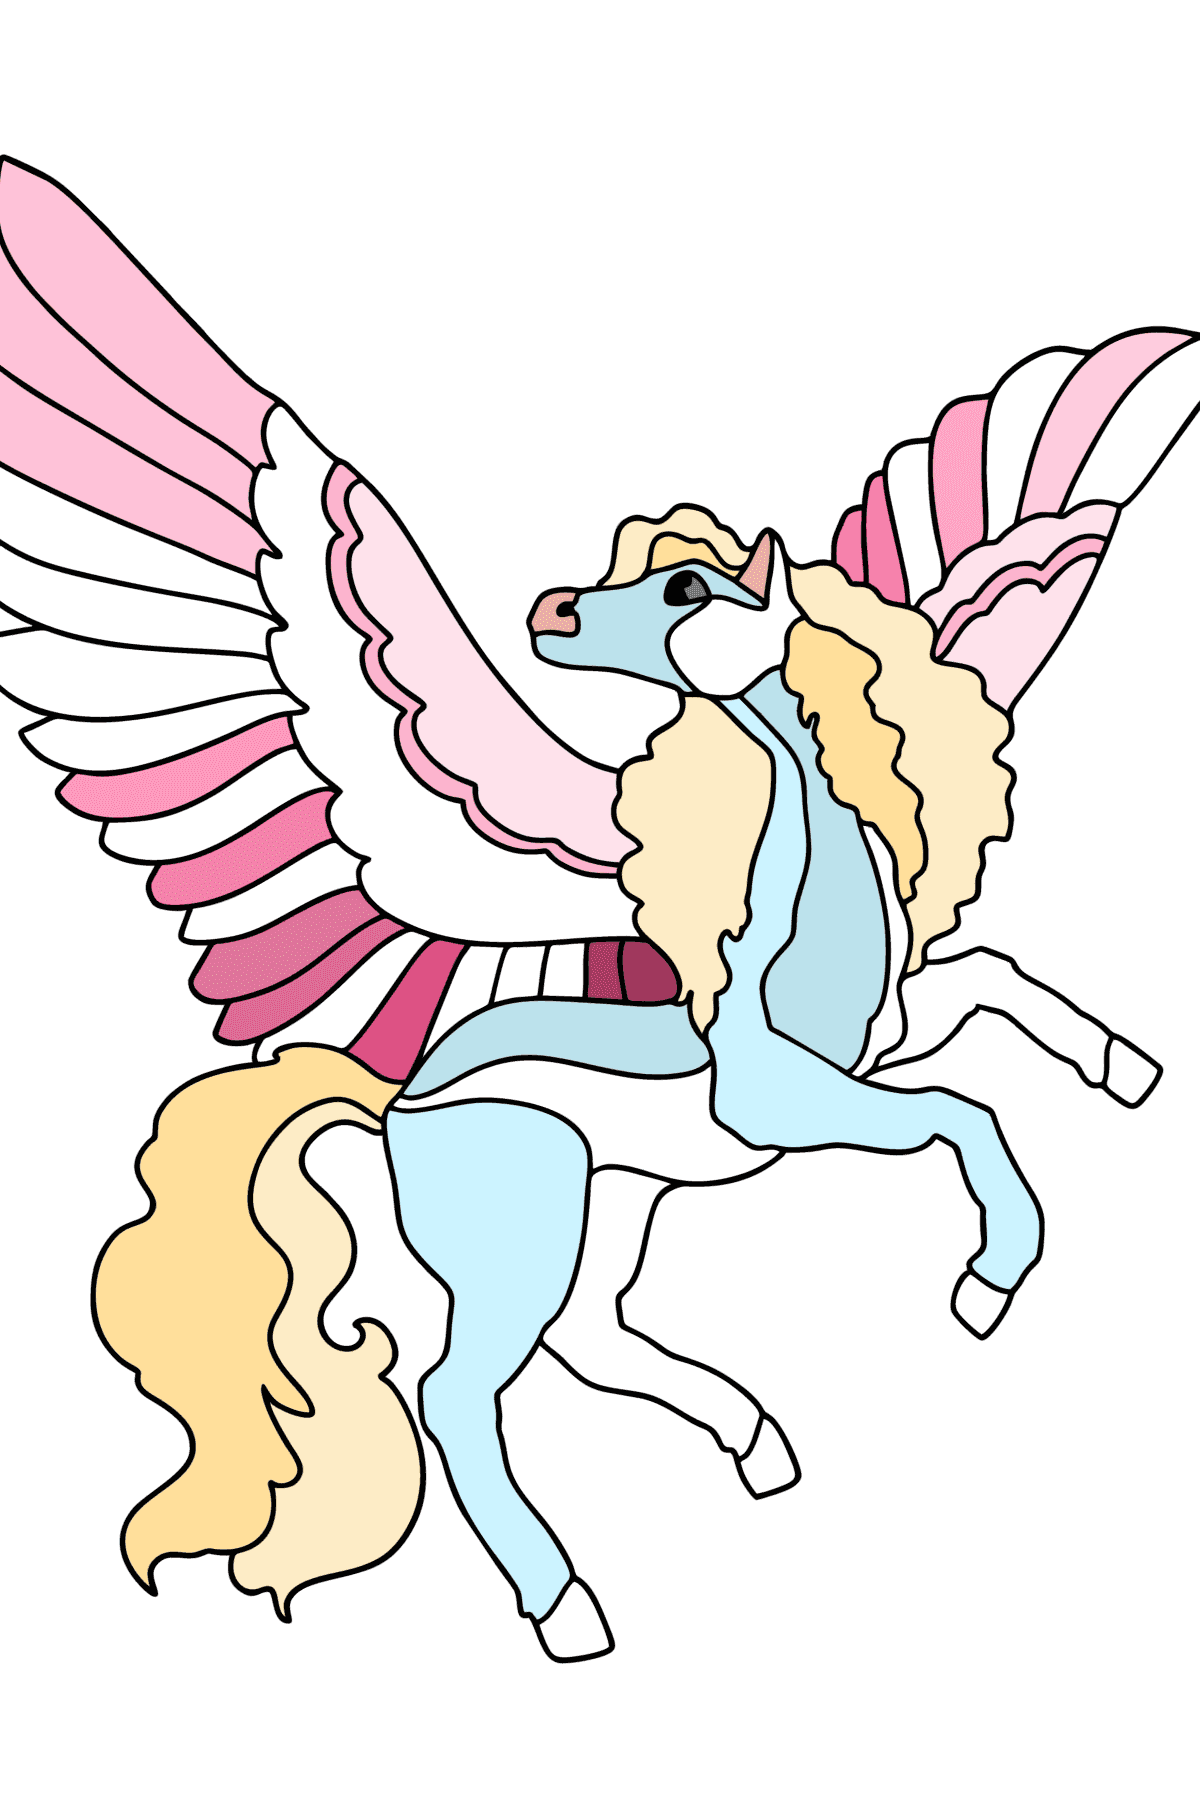 Pegasus with pink wings сoloring page - Coloring Pages for Kids